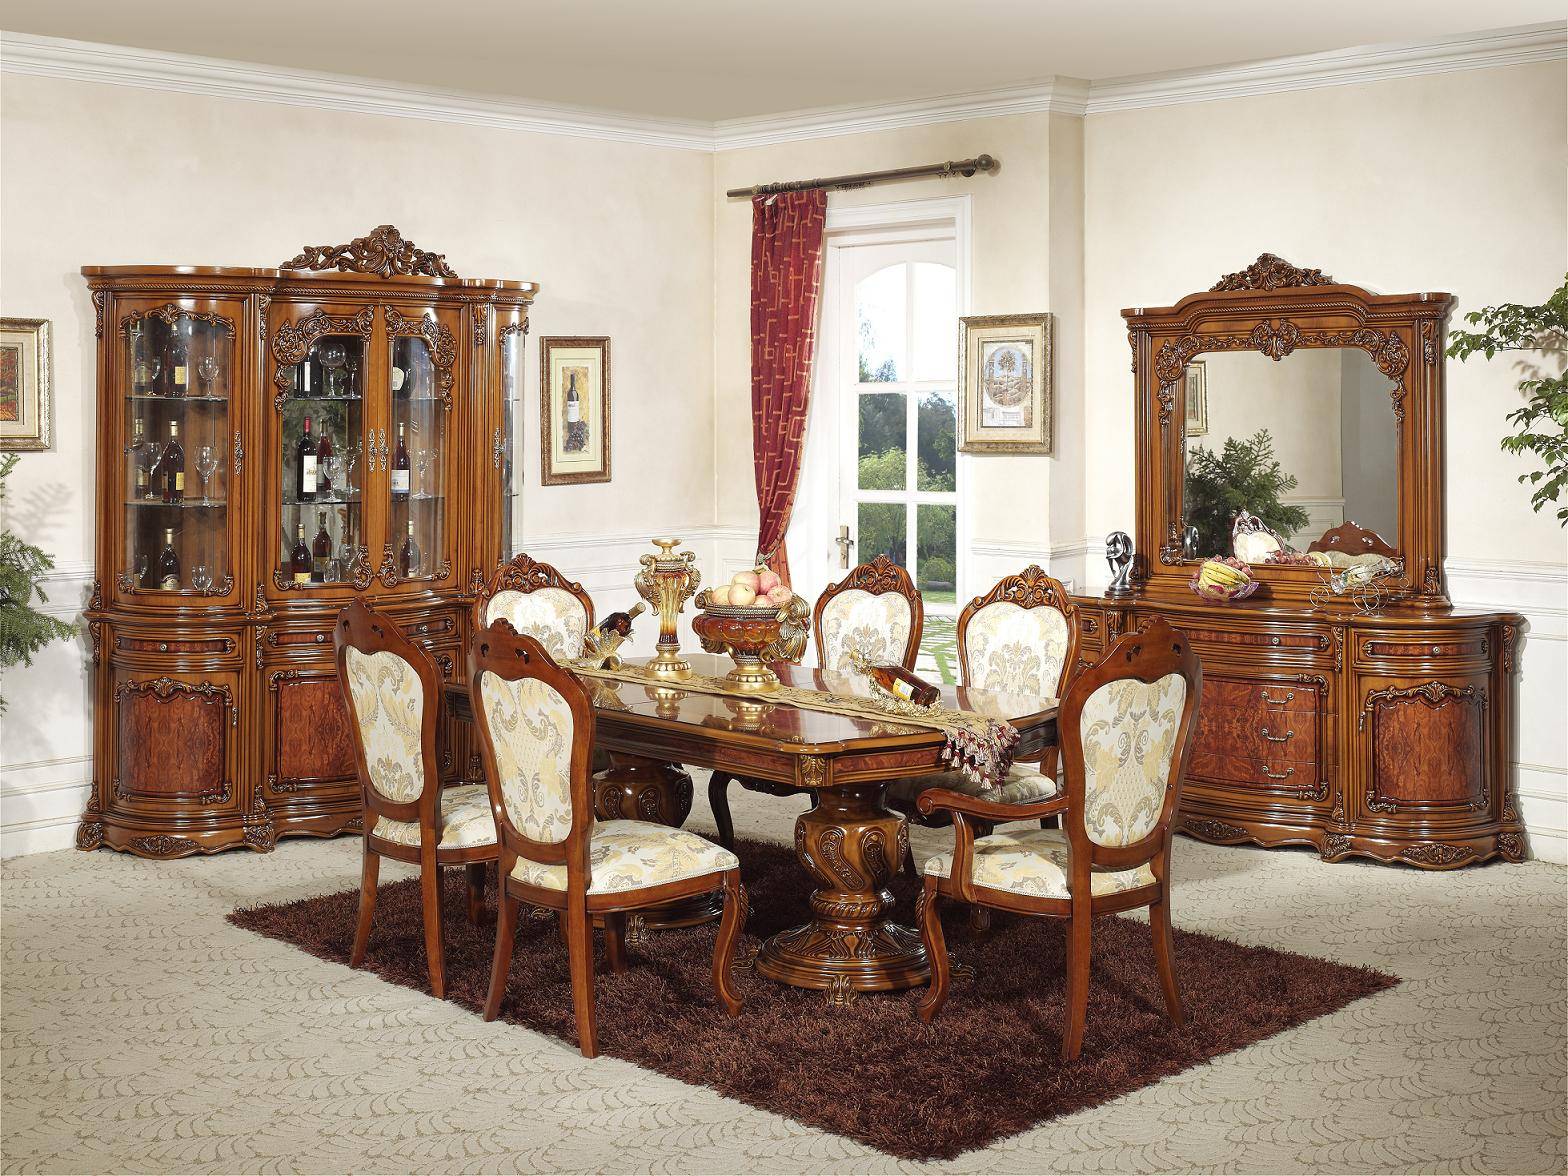 Spanish Style Dining Room Furniture, Dining Room Furniture In Spanish